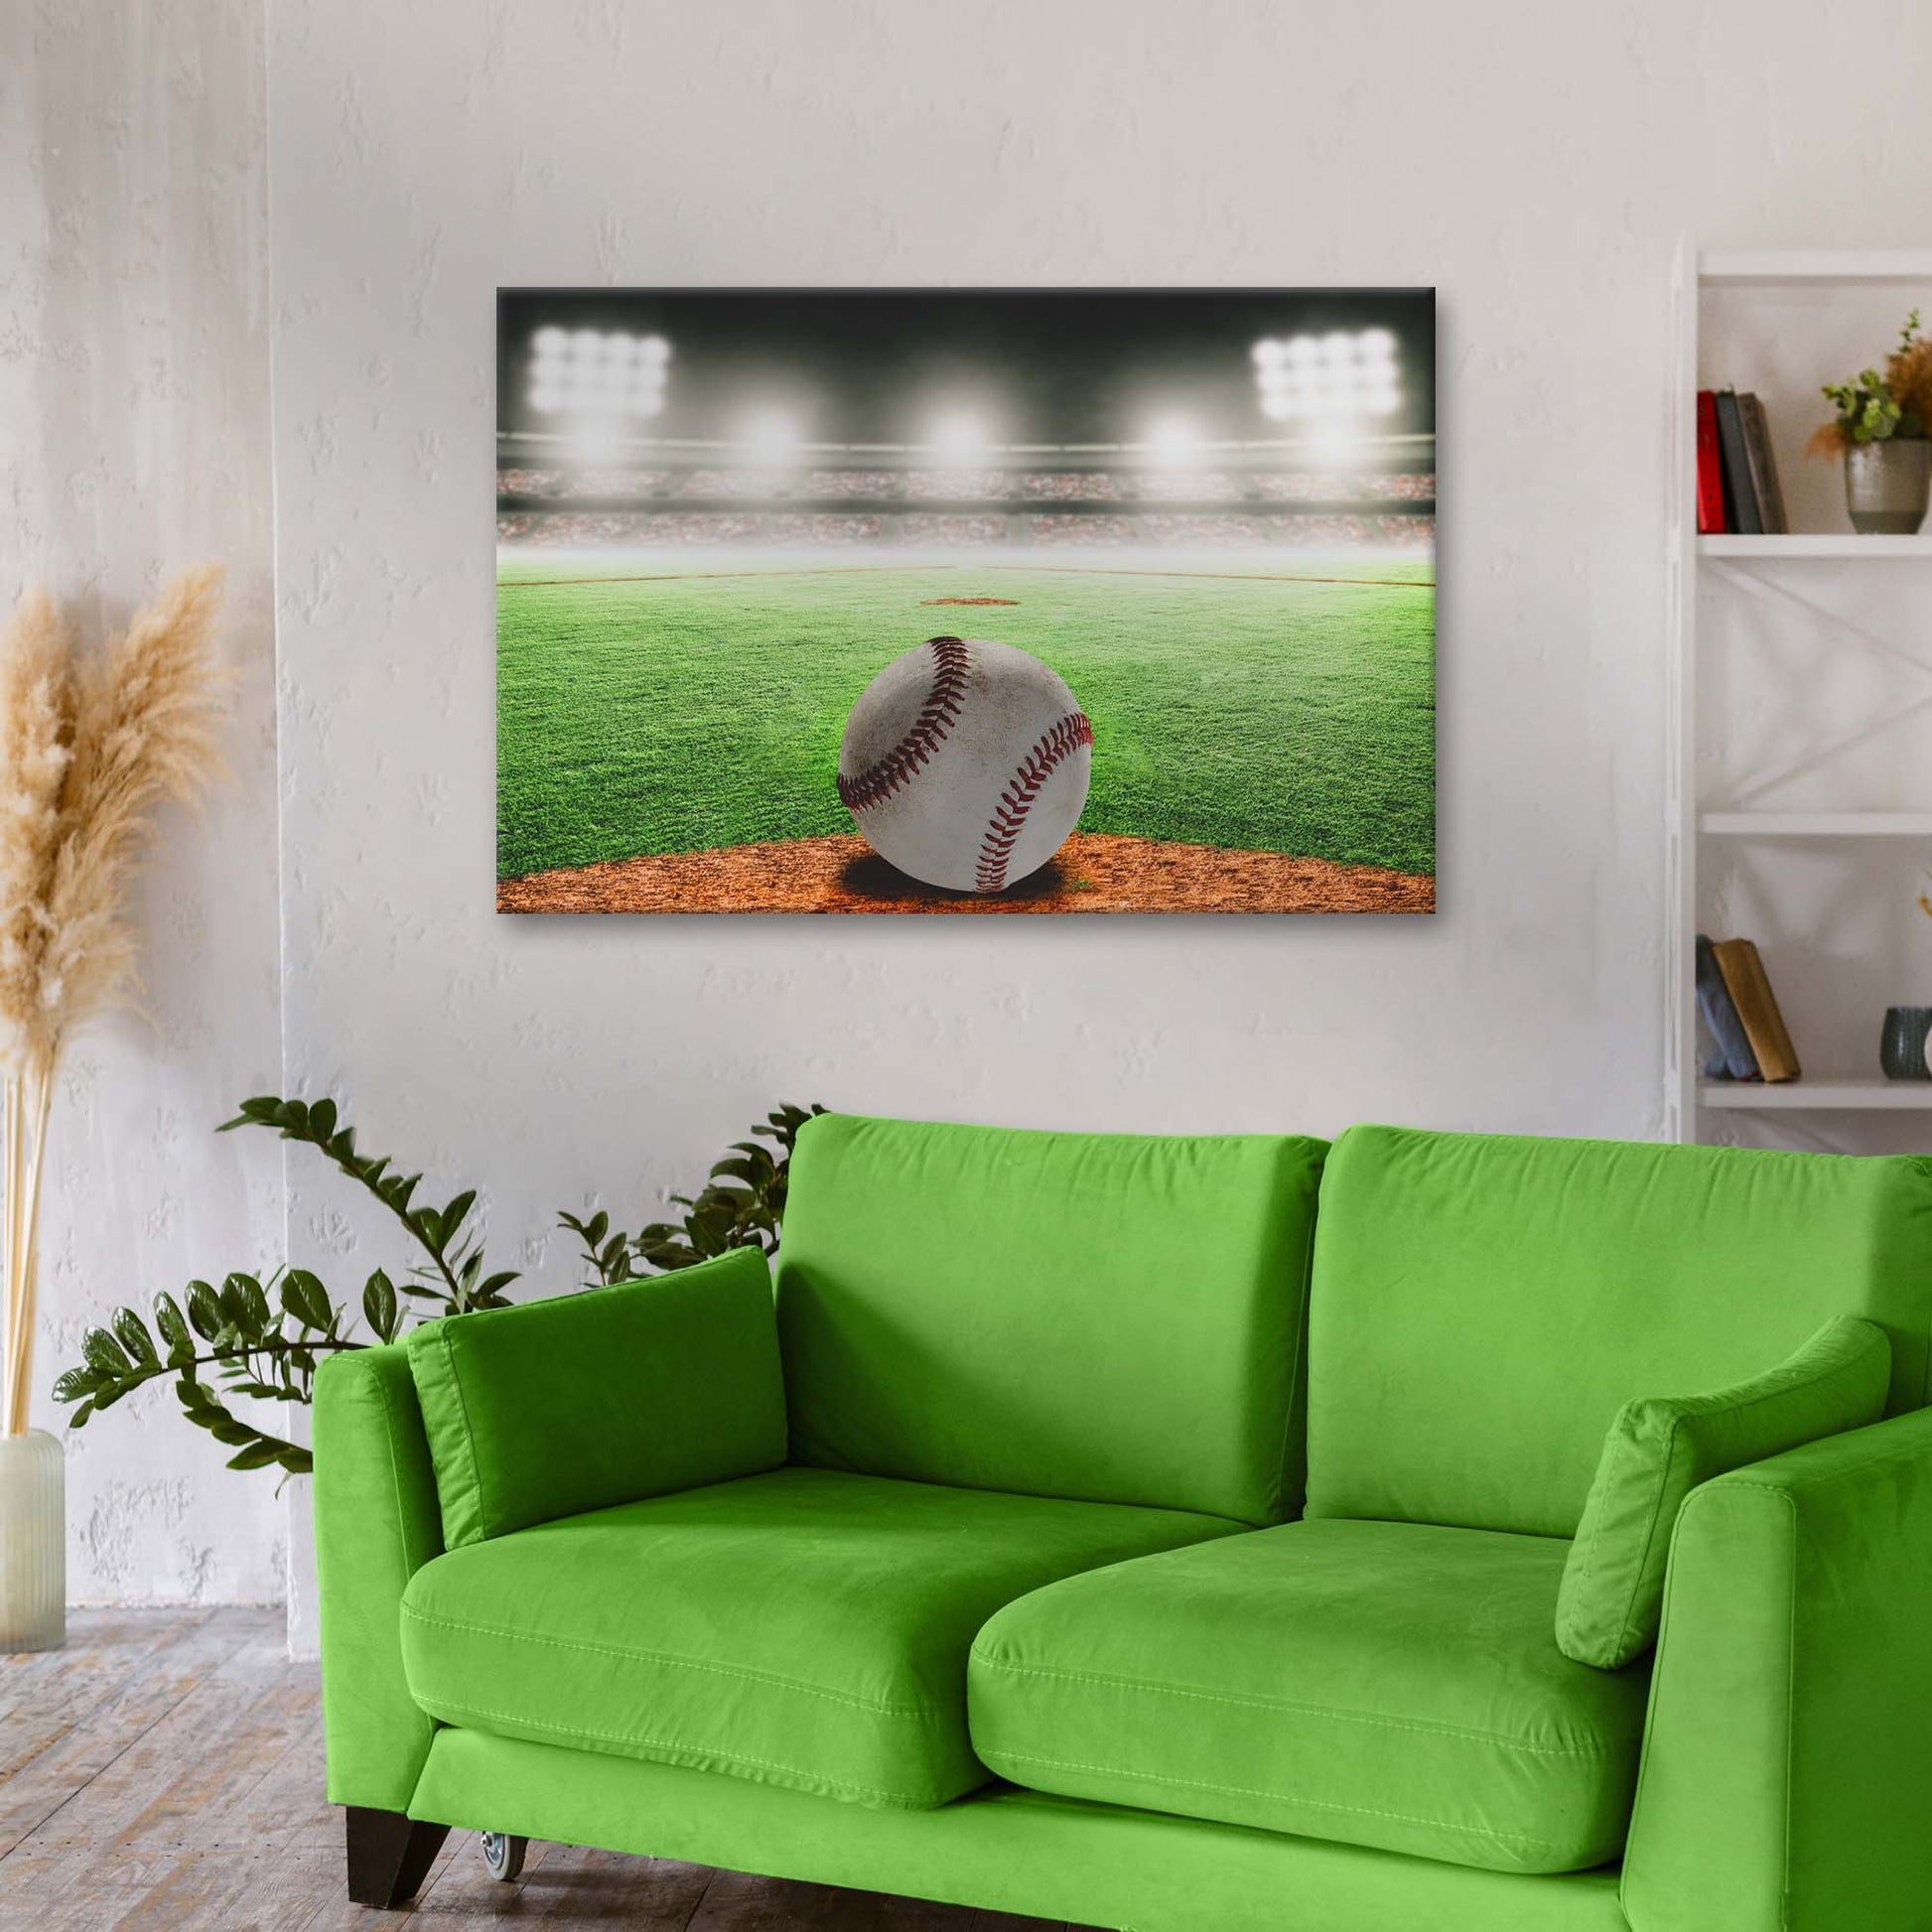 Baseball Arena Canvas Wall Art - Image by Tailored Canvases